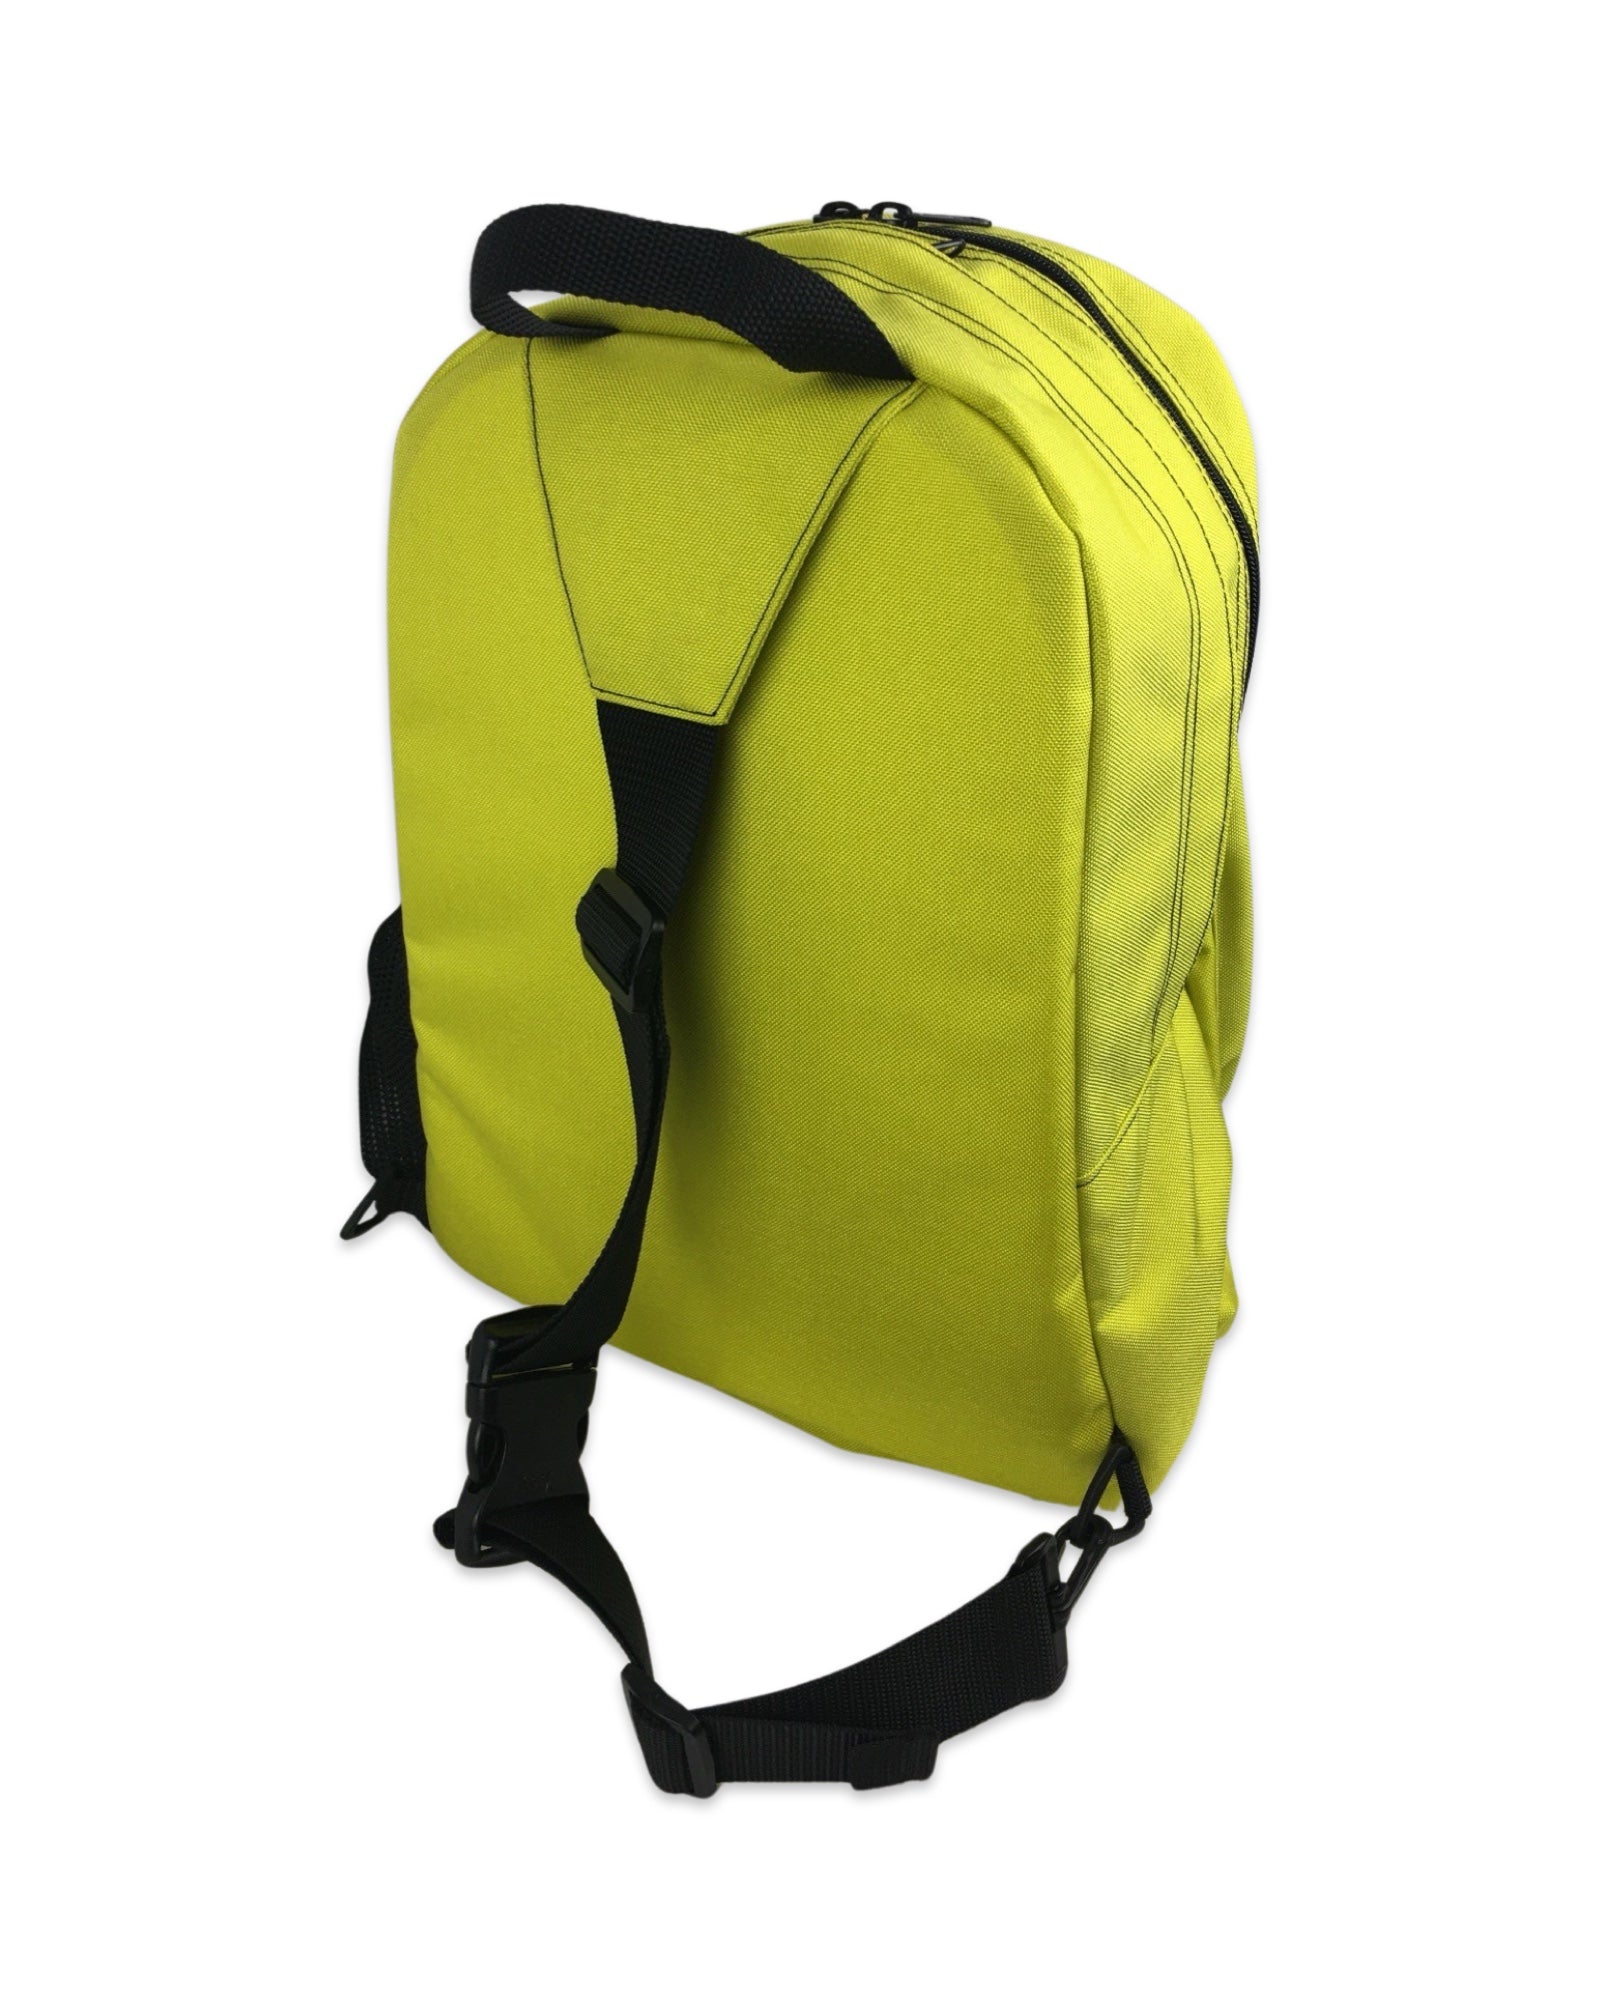 SLING DOUBLE CAYUGA Backpacks, by Tough Traveler. Made in USA since 1970